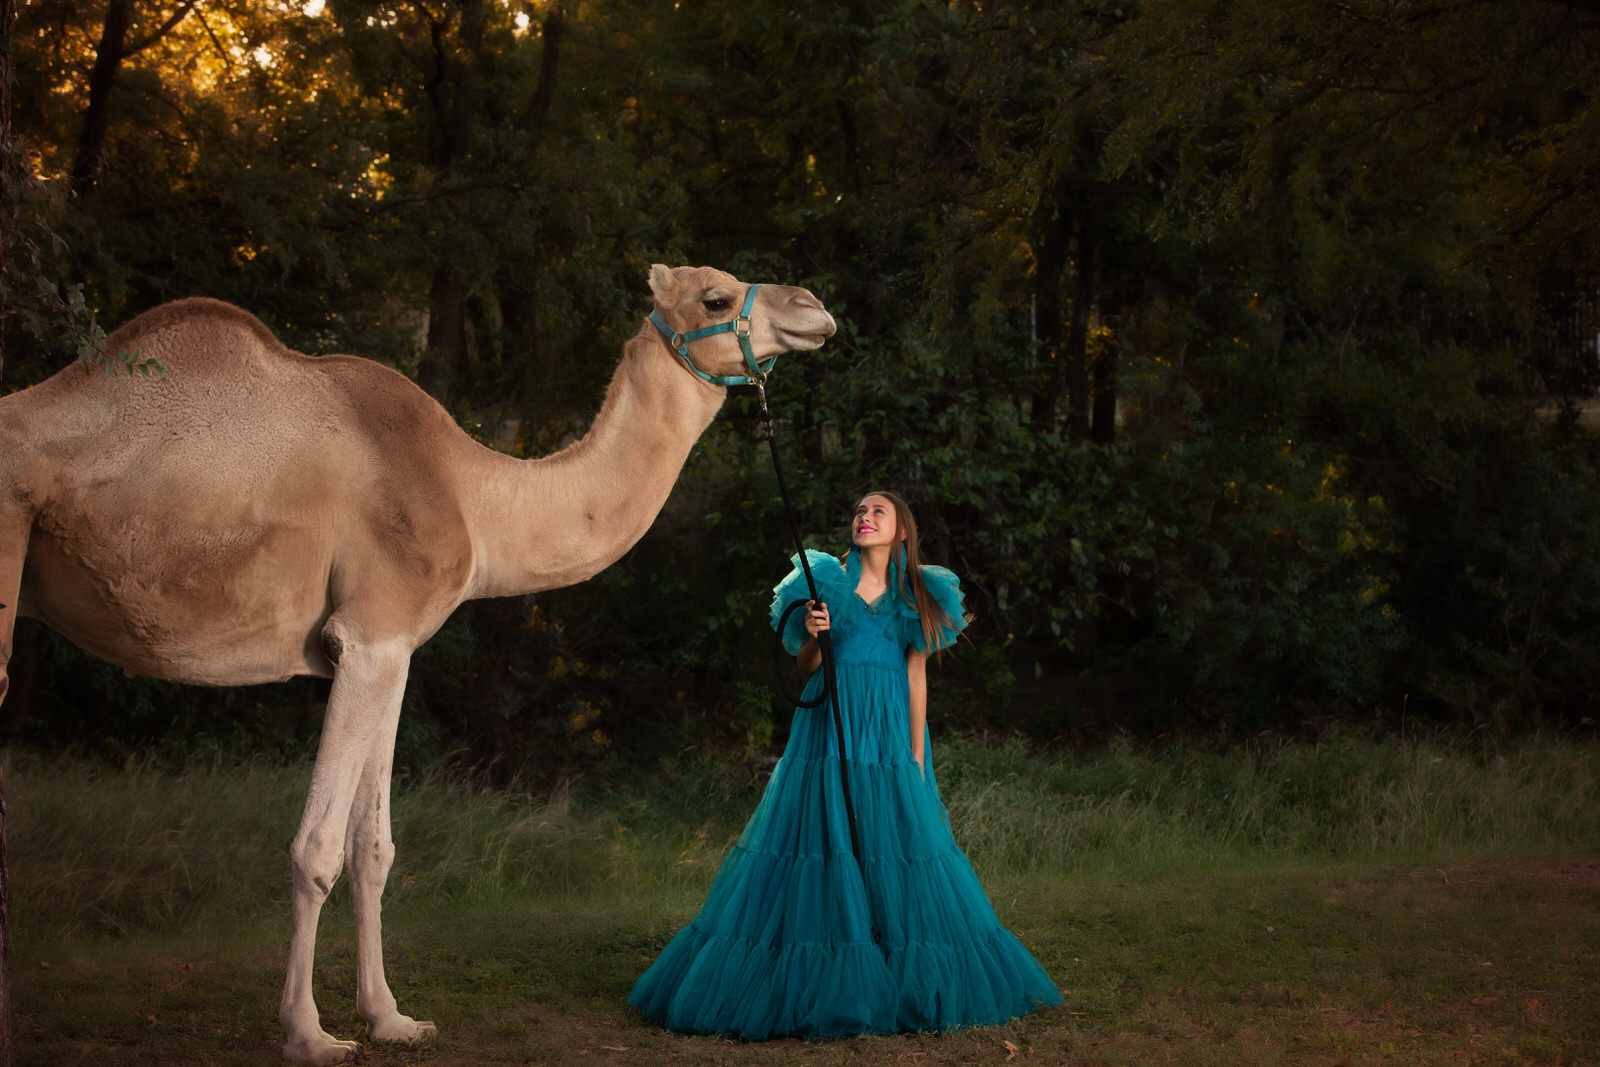 A teenage girl in a blue gown stands in a path walking a camel on a leash things to do in midlothian tx